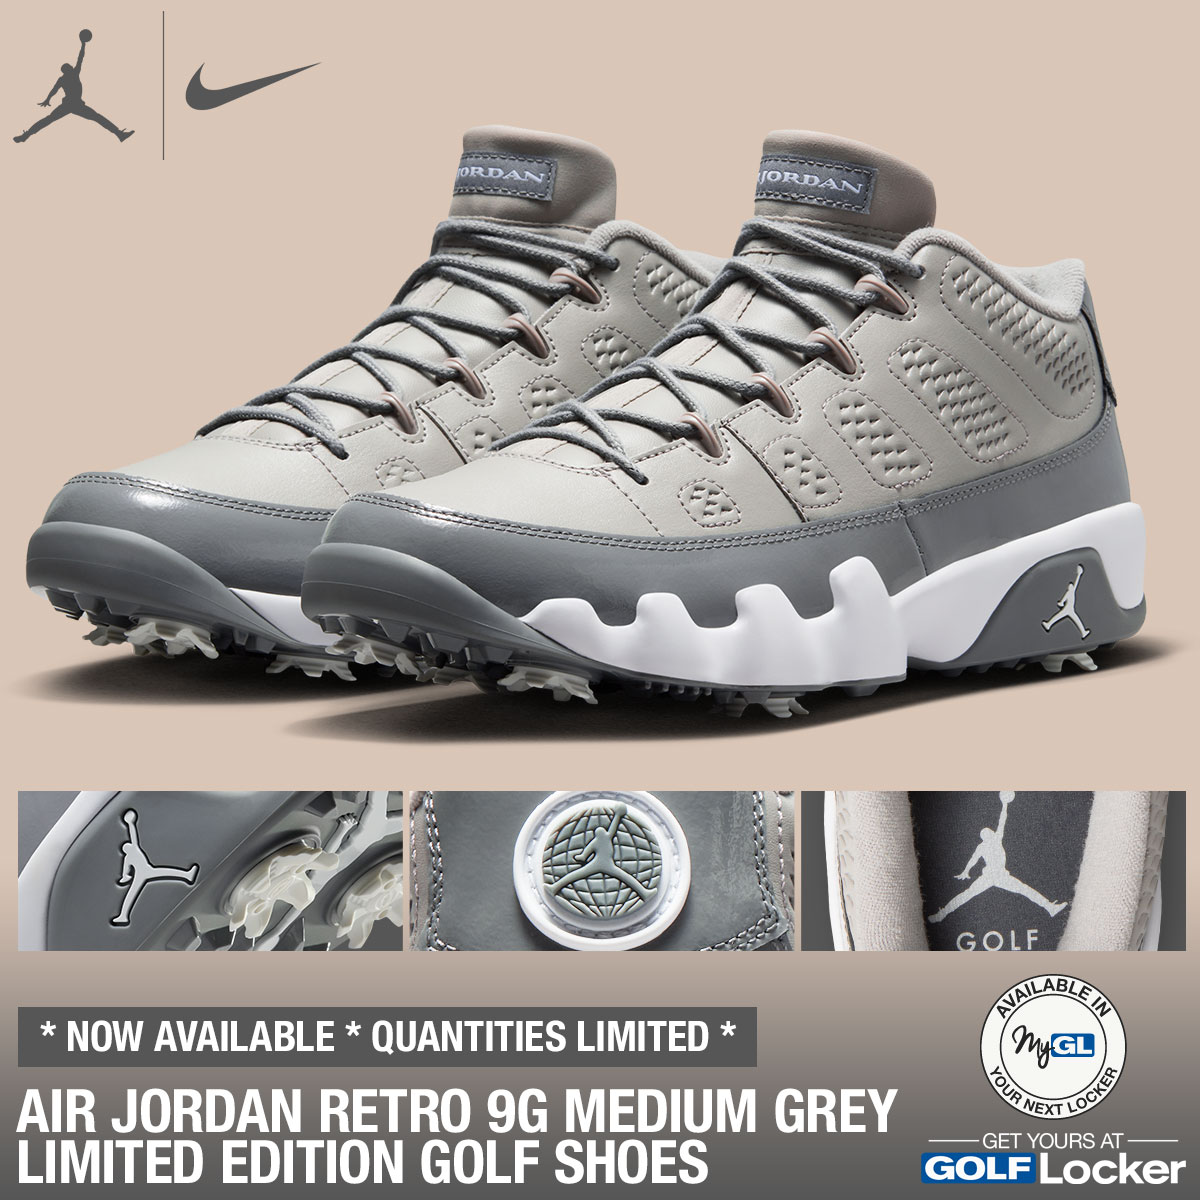 Air Jordan Retro 9G Golf Shoes - Limited Edition - NOW SHIPPING